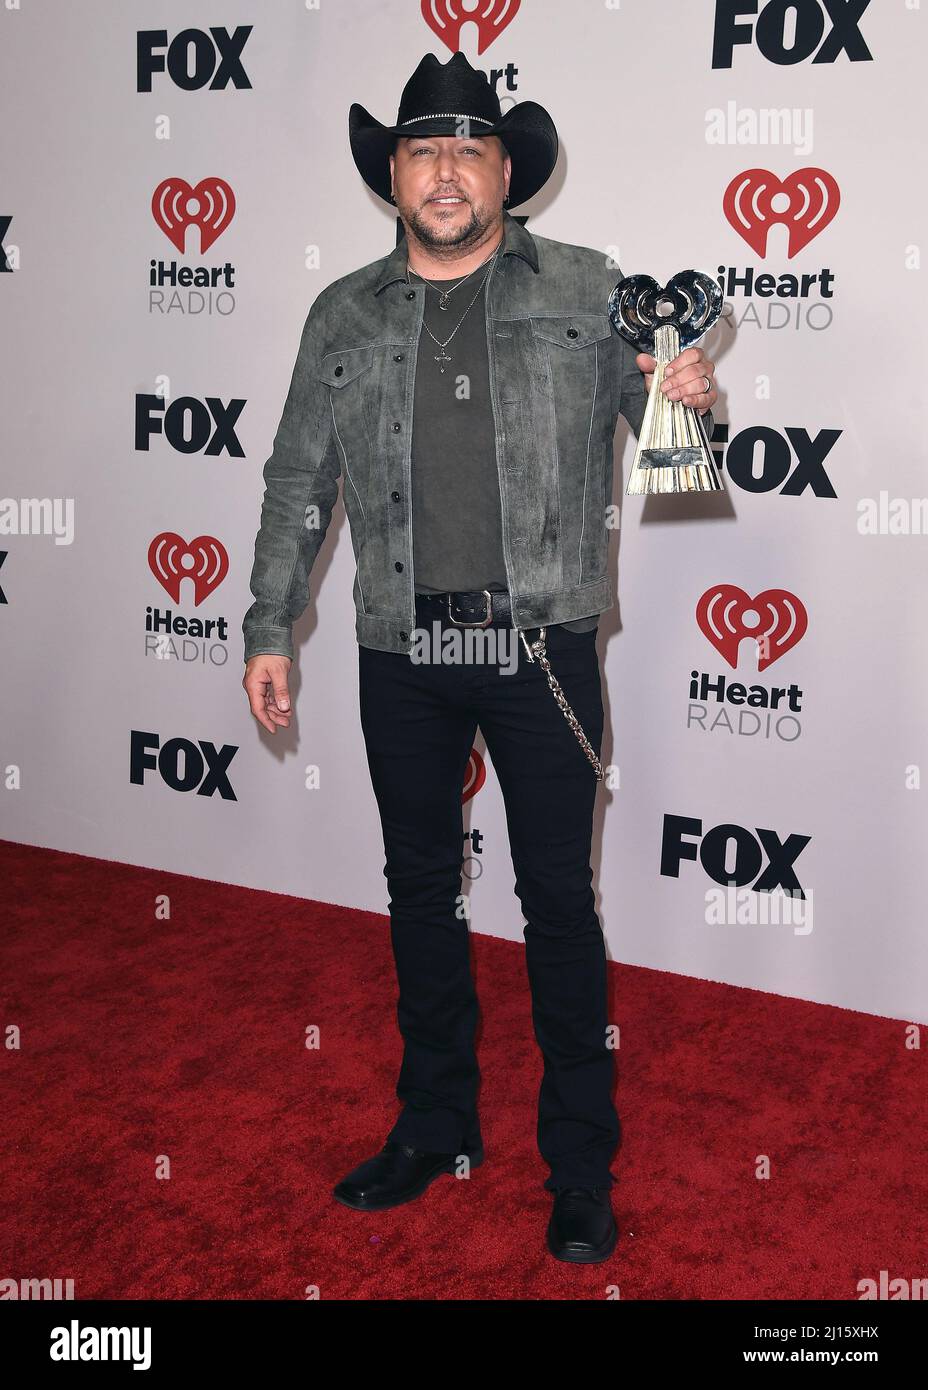 Los Angeles, California, USA. 22nd March, 2022. 2022 IHEARTRADIO MUSIC AWARDS: Jason Aldean at the 2021 “iHeartRadio Music Awards” airing live from The Shrine Auditorium in Los Angeles, Tuesday, March 22 (8:00-10:00 PM ET Live/PT tape-delayed) on FOX. CR: Scott Kirkland/PictureGroup/Sipa USA for FOX. Credit: 2022 FOX MEDIA, LLC. Credit: Sipa USA/Alamy Live News Stock Photo